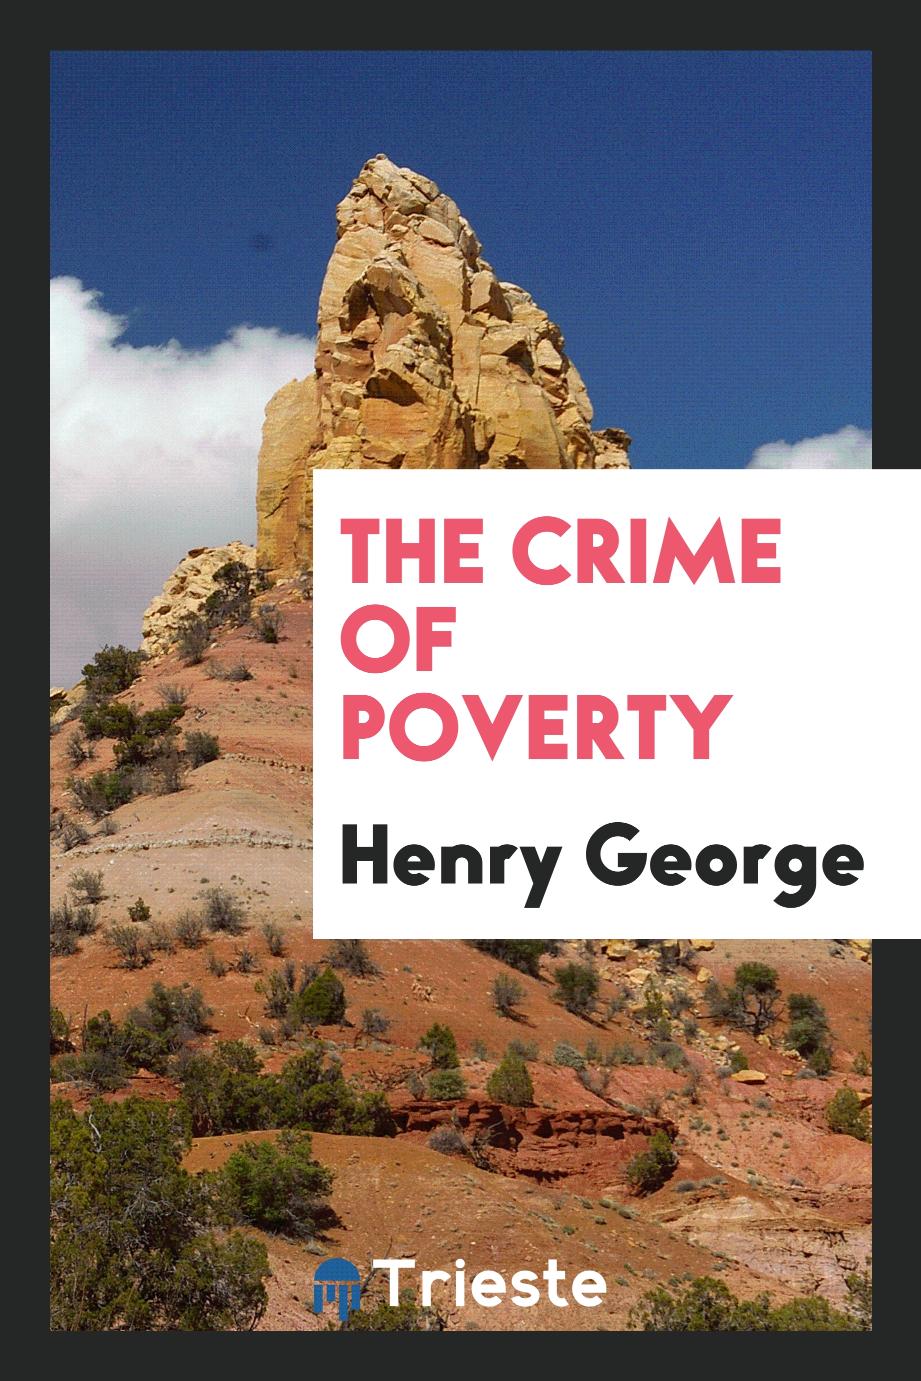 The Crime of poverty